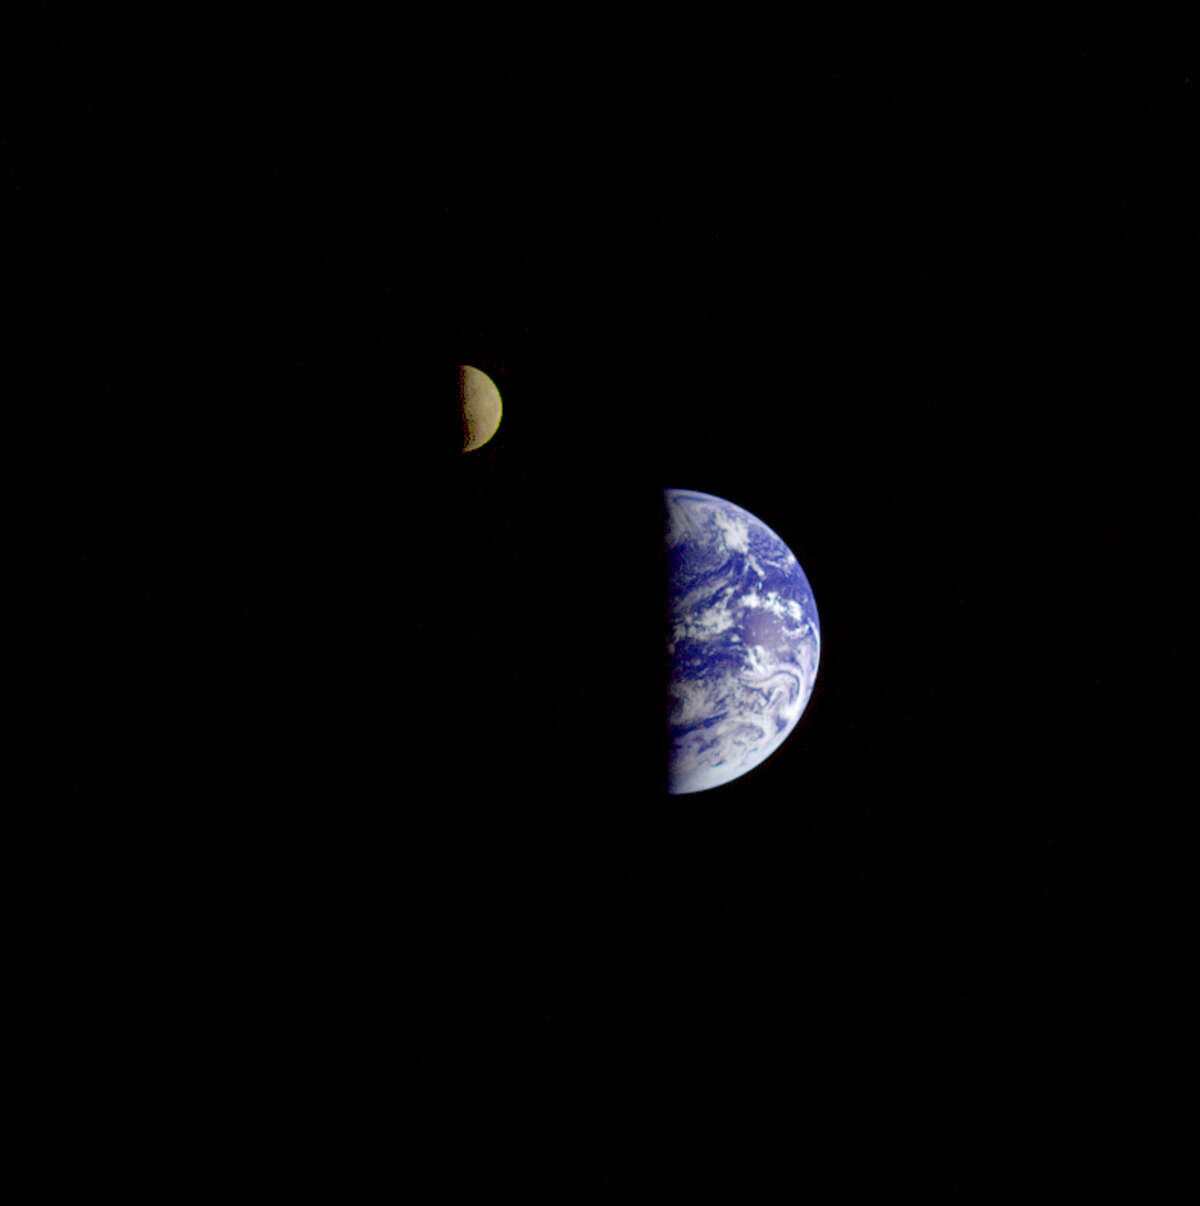 Eight days after its final encounter with the Earth, the Galileo spacecraft looked back and captured this remarkable view of the Earth and Moon. The image was taken from a distance of about 6.2 million km (3.9 million miles). The picture was made with images taken through the violet, red, and 1.0-micron infrared filters. The Moon is in the foreground, moving from left to right. The brightly-colored Earth contrasts strongly with the Moon, which reflects only about one-third as much sunlight as the Earth. Contrast and color have been computer-enhanced for both objects to improve visibility. Antarctica is visible through clouds (bottom). The Moon's far side is seen; the shadowy indentation in the dawn terminator is the south pole Aitken Basin, one of the largest and oldest lunar impact features.